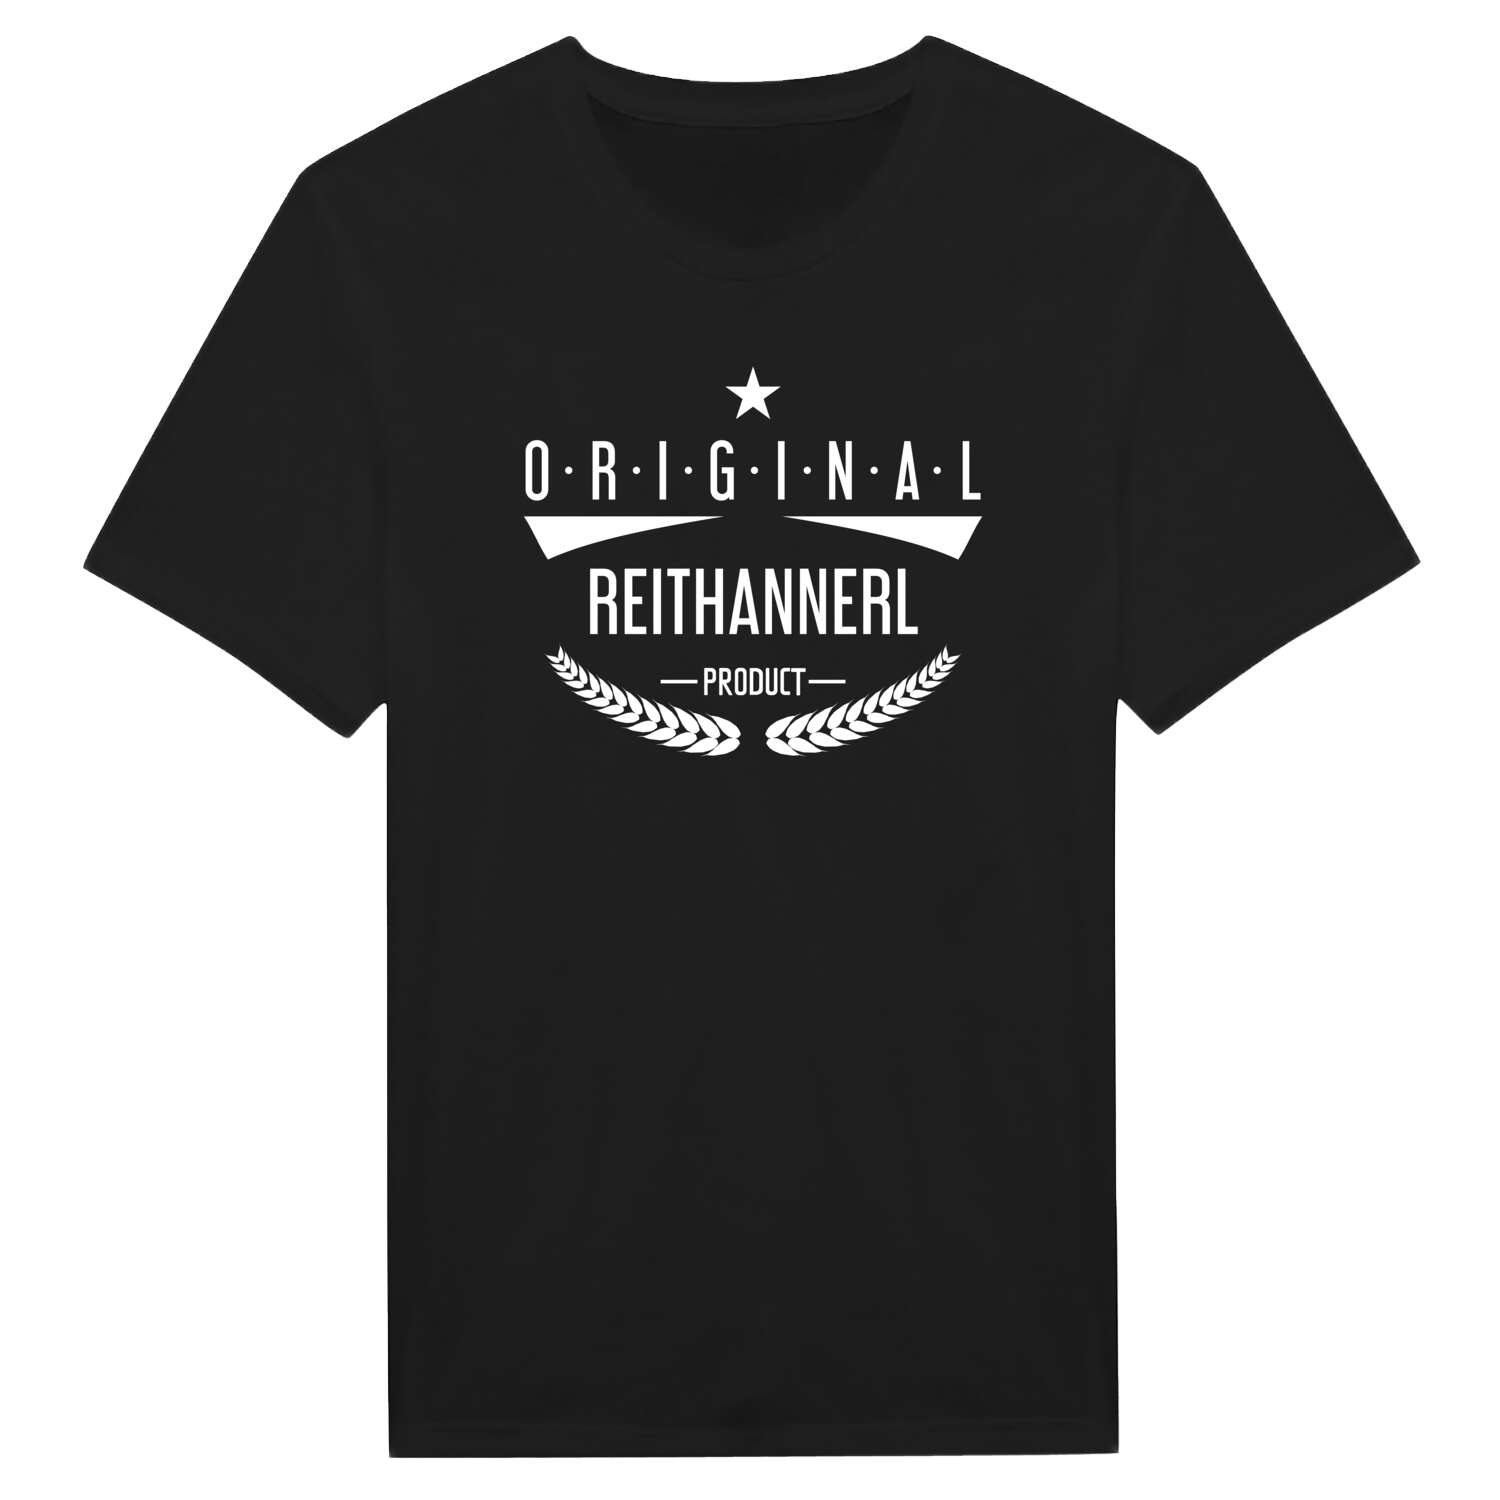 Reithannerl T-Shirt »Original Product«